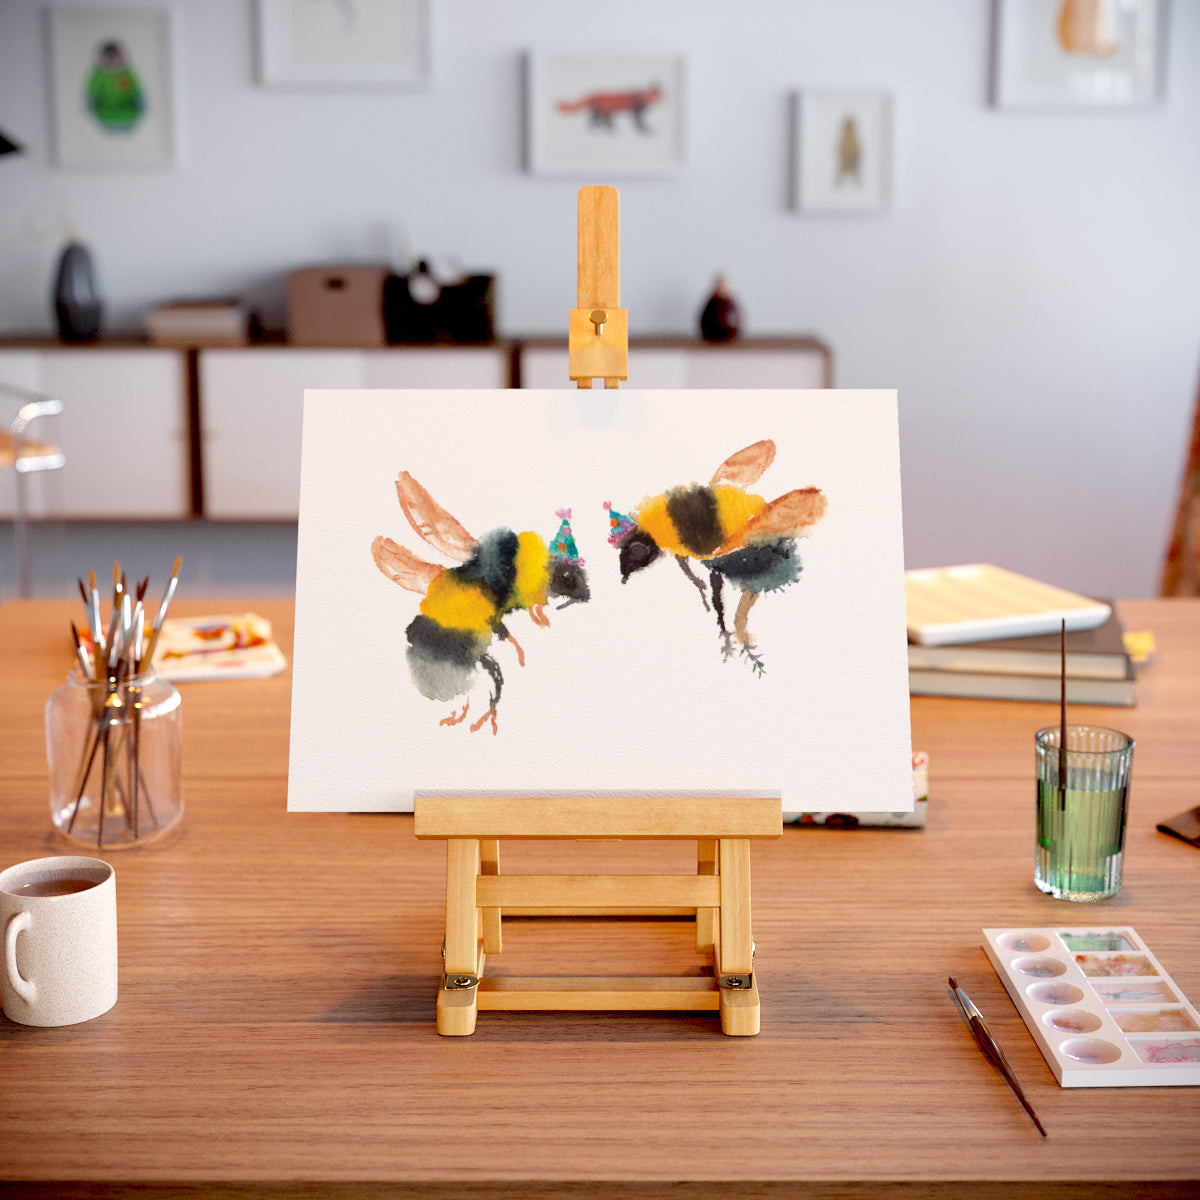 Bee Party Decor Pack – Print and Main